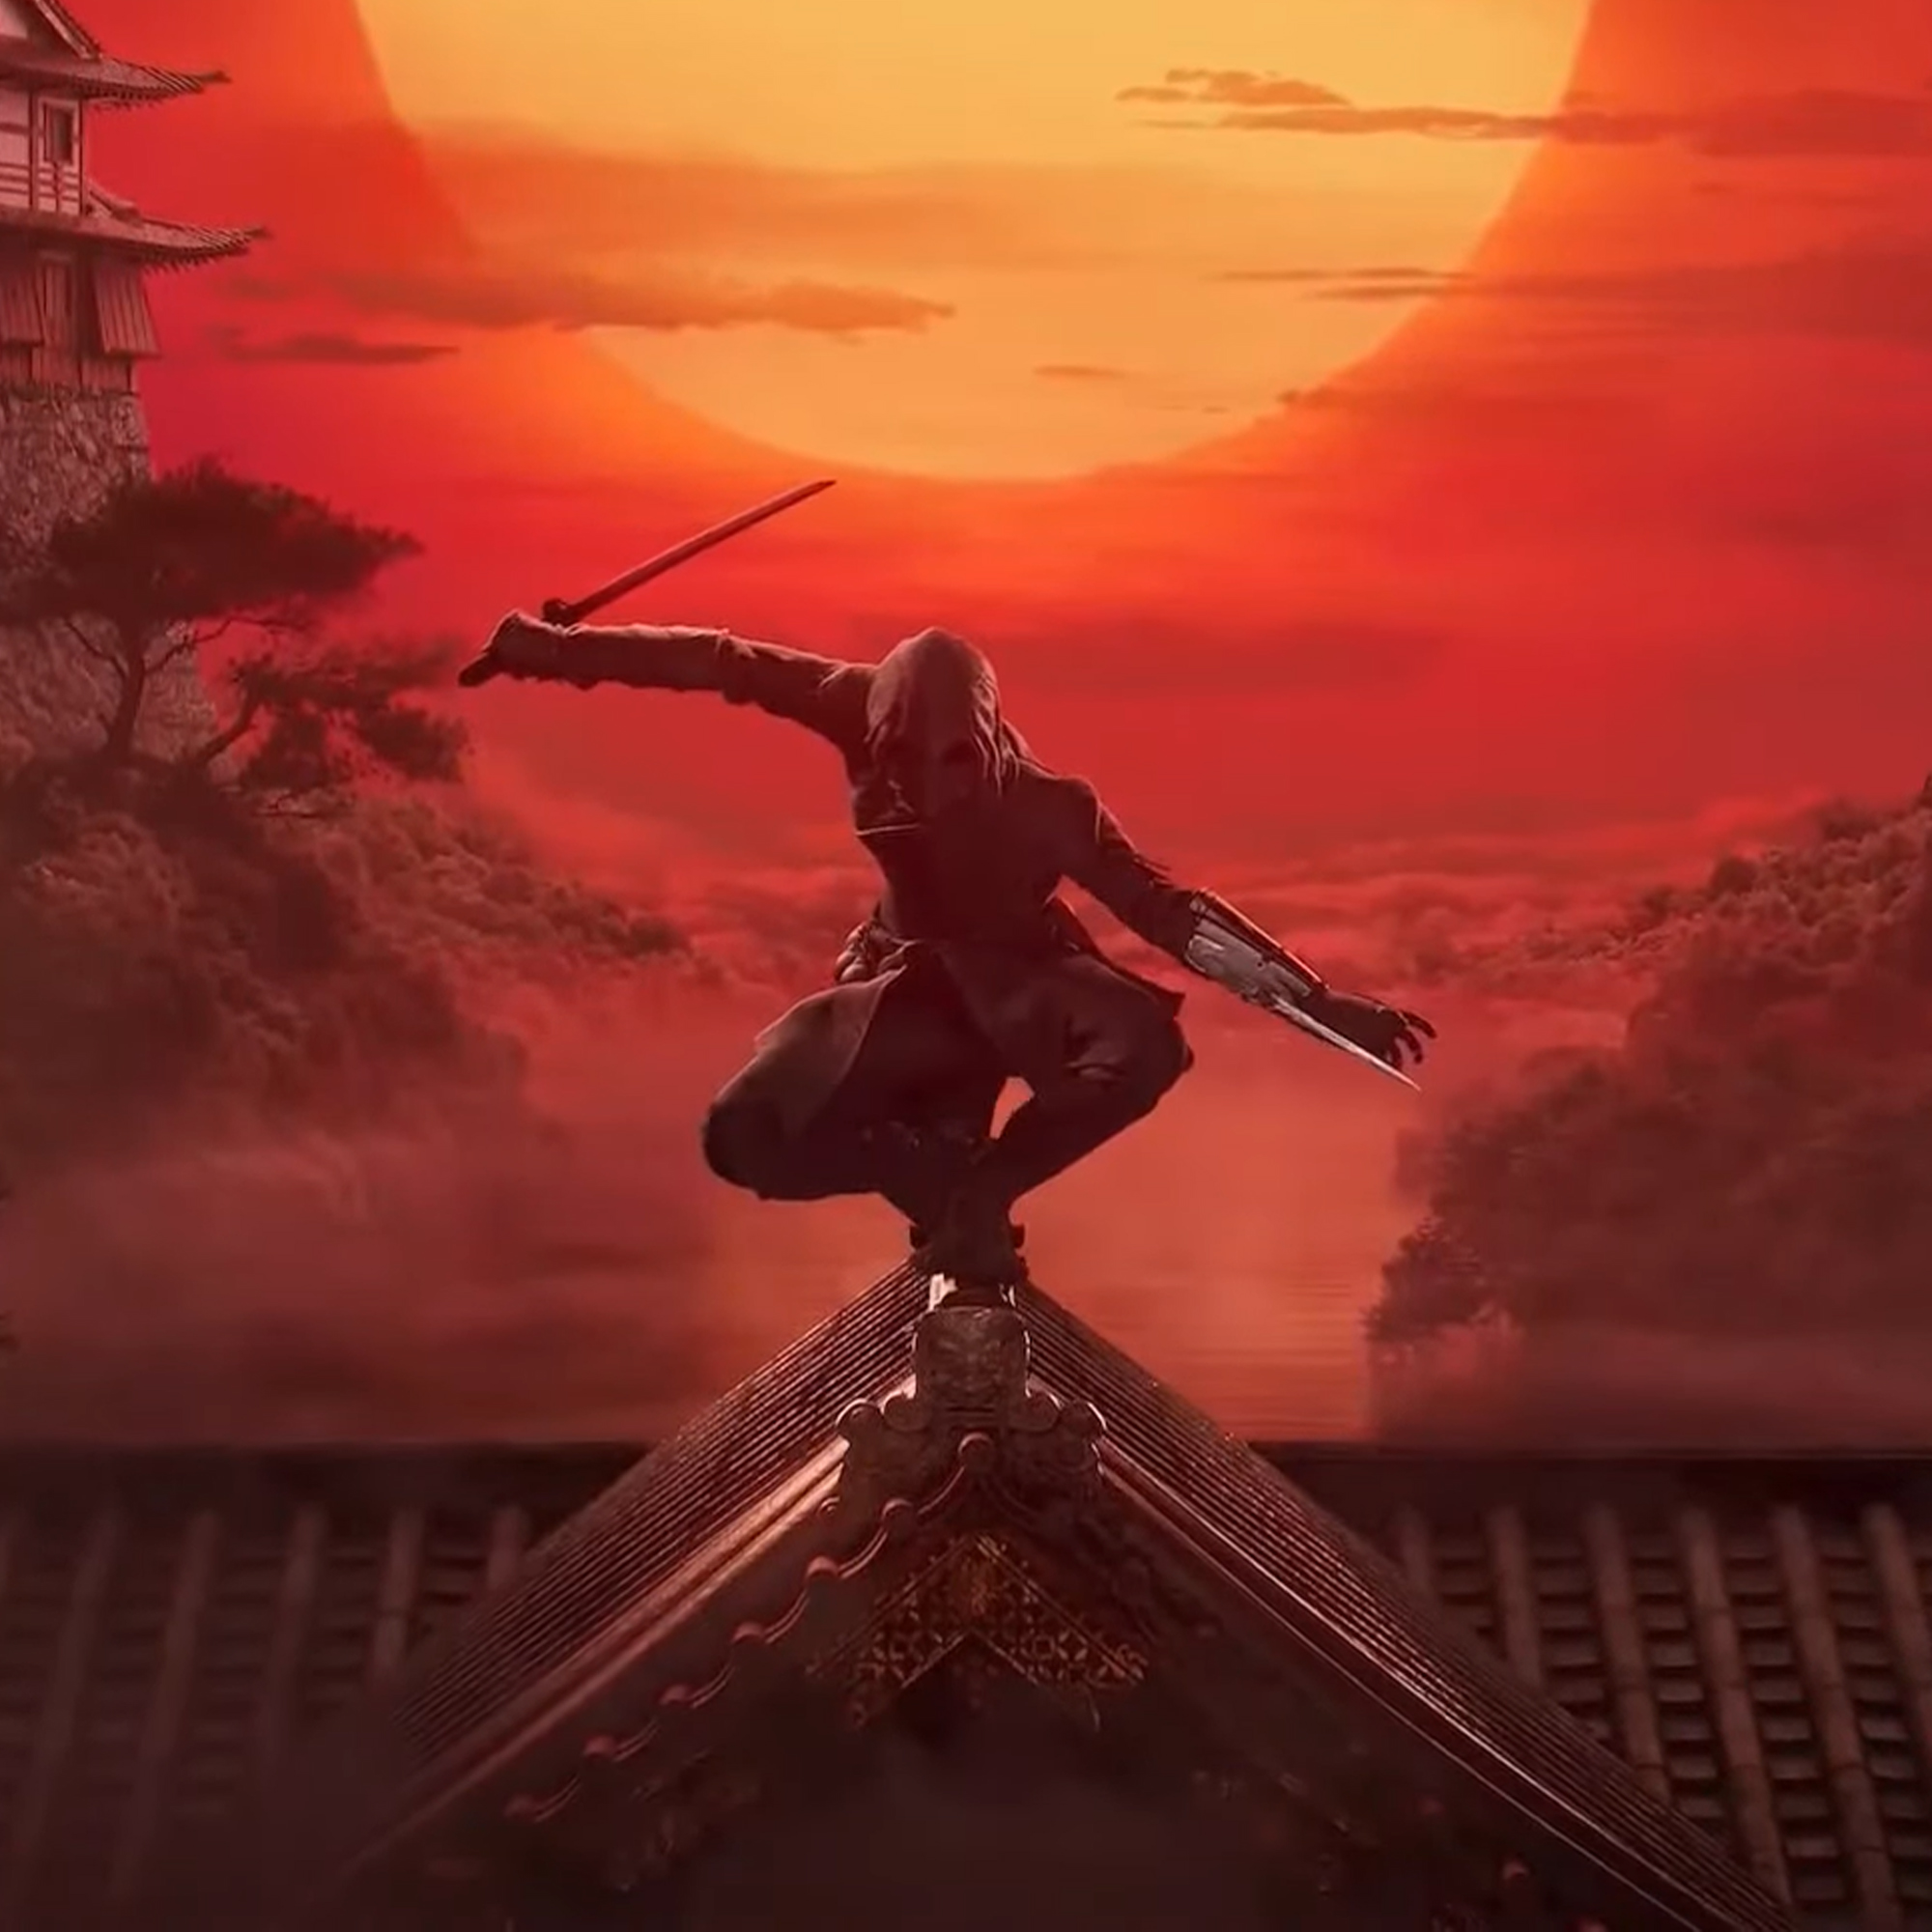 A shinobi perched on a rooftop holding a sword and unsheathing a hidden blade from the Assassin's Creed Red trailer.